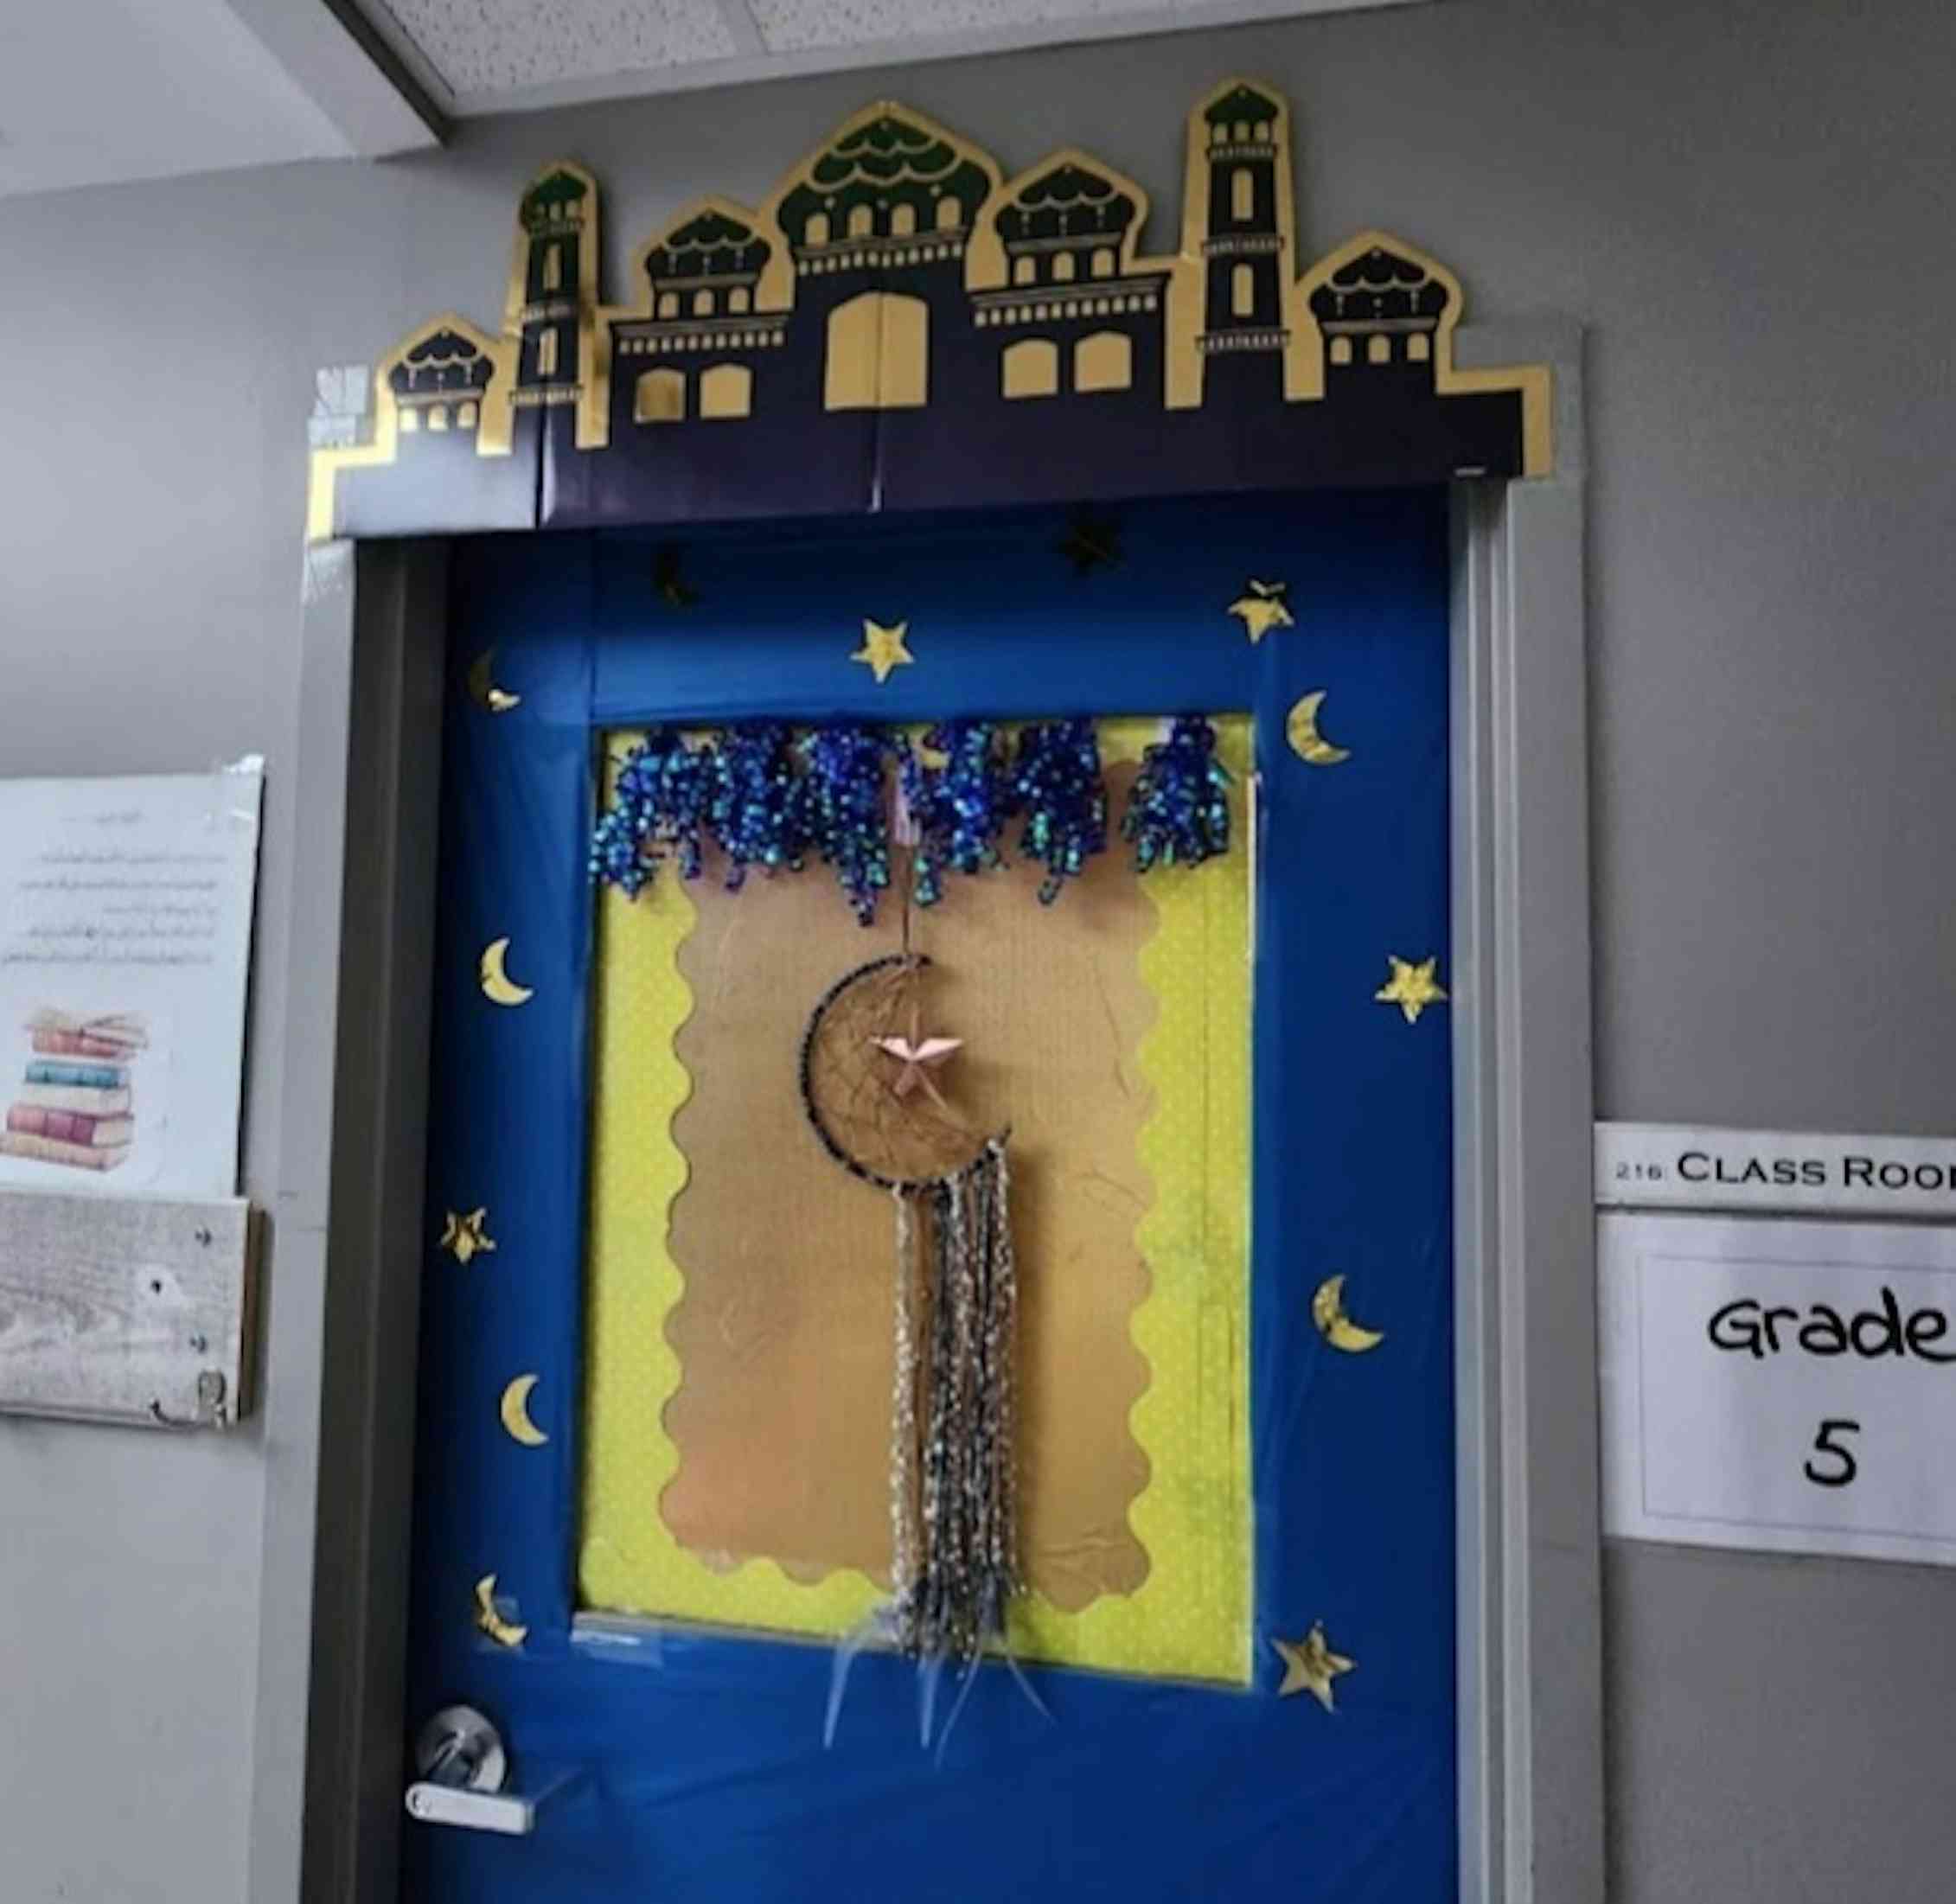 A door seen decorated with a hanging crescent moon.